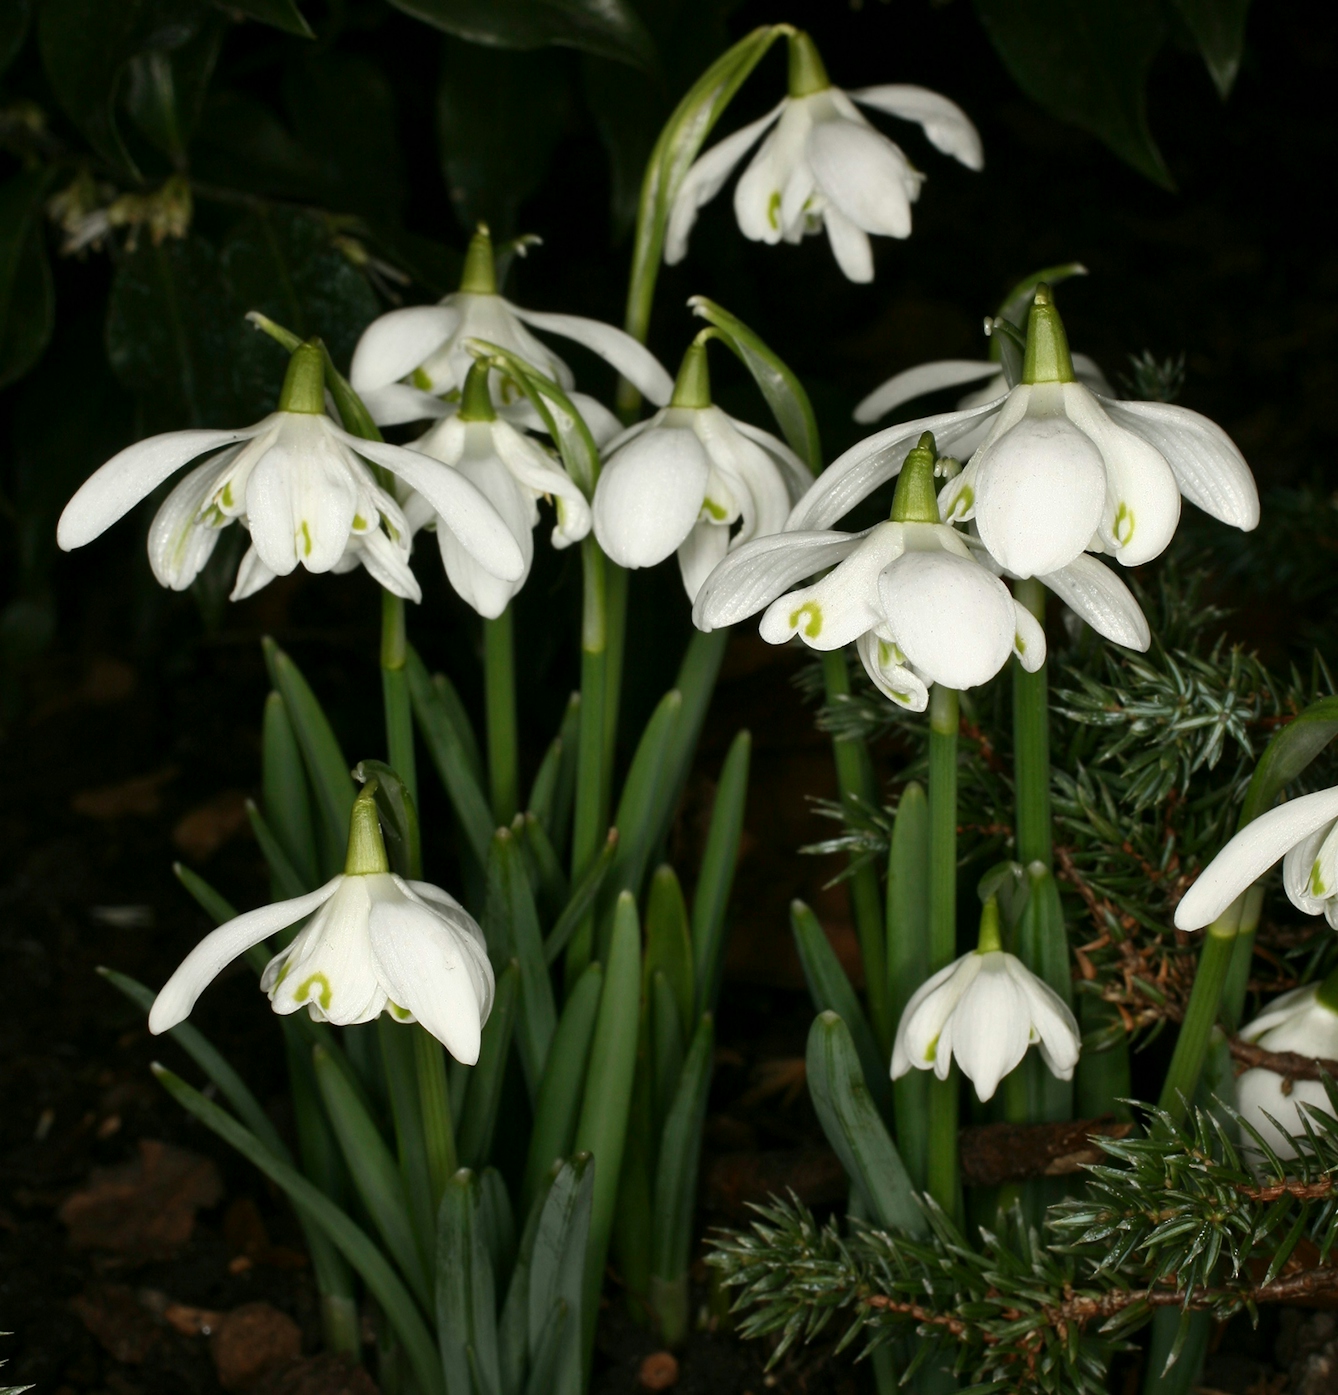 Colour, close-up photograph of a small clump of snowdrops in flower.